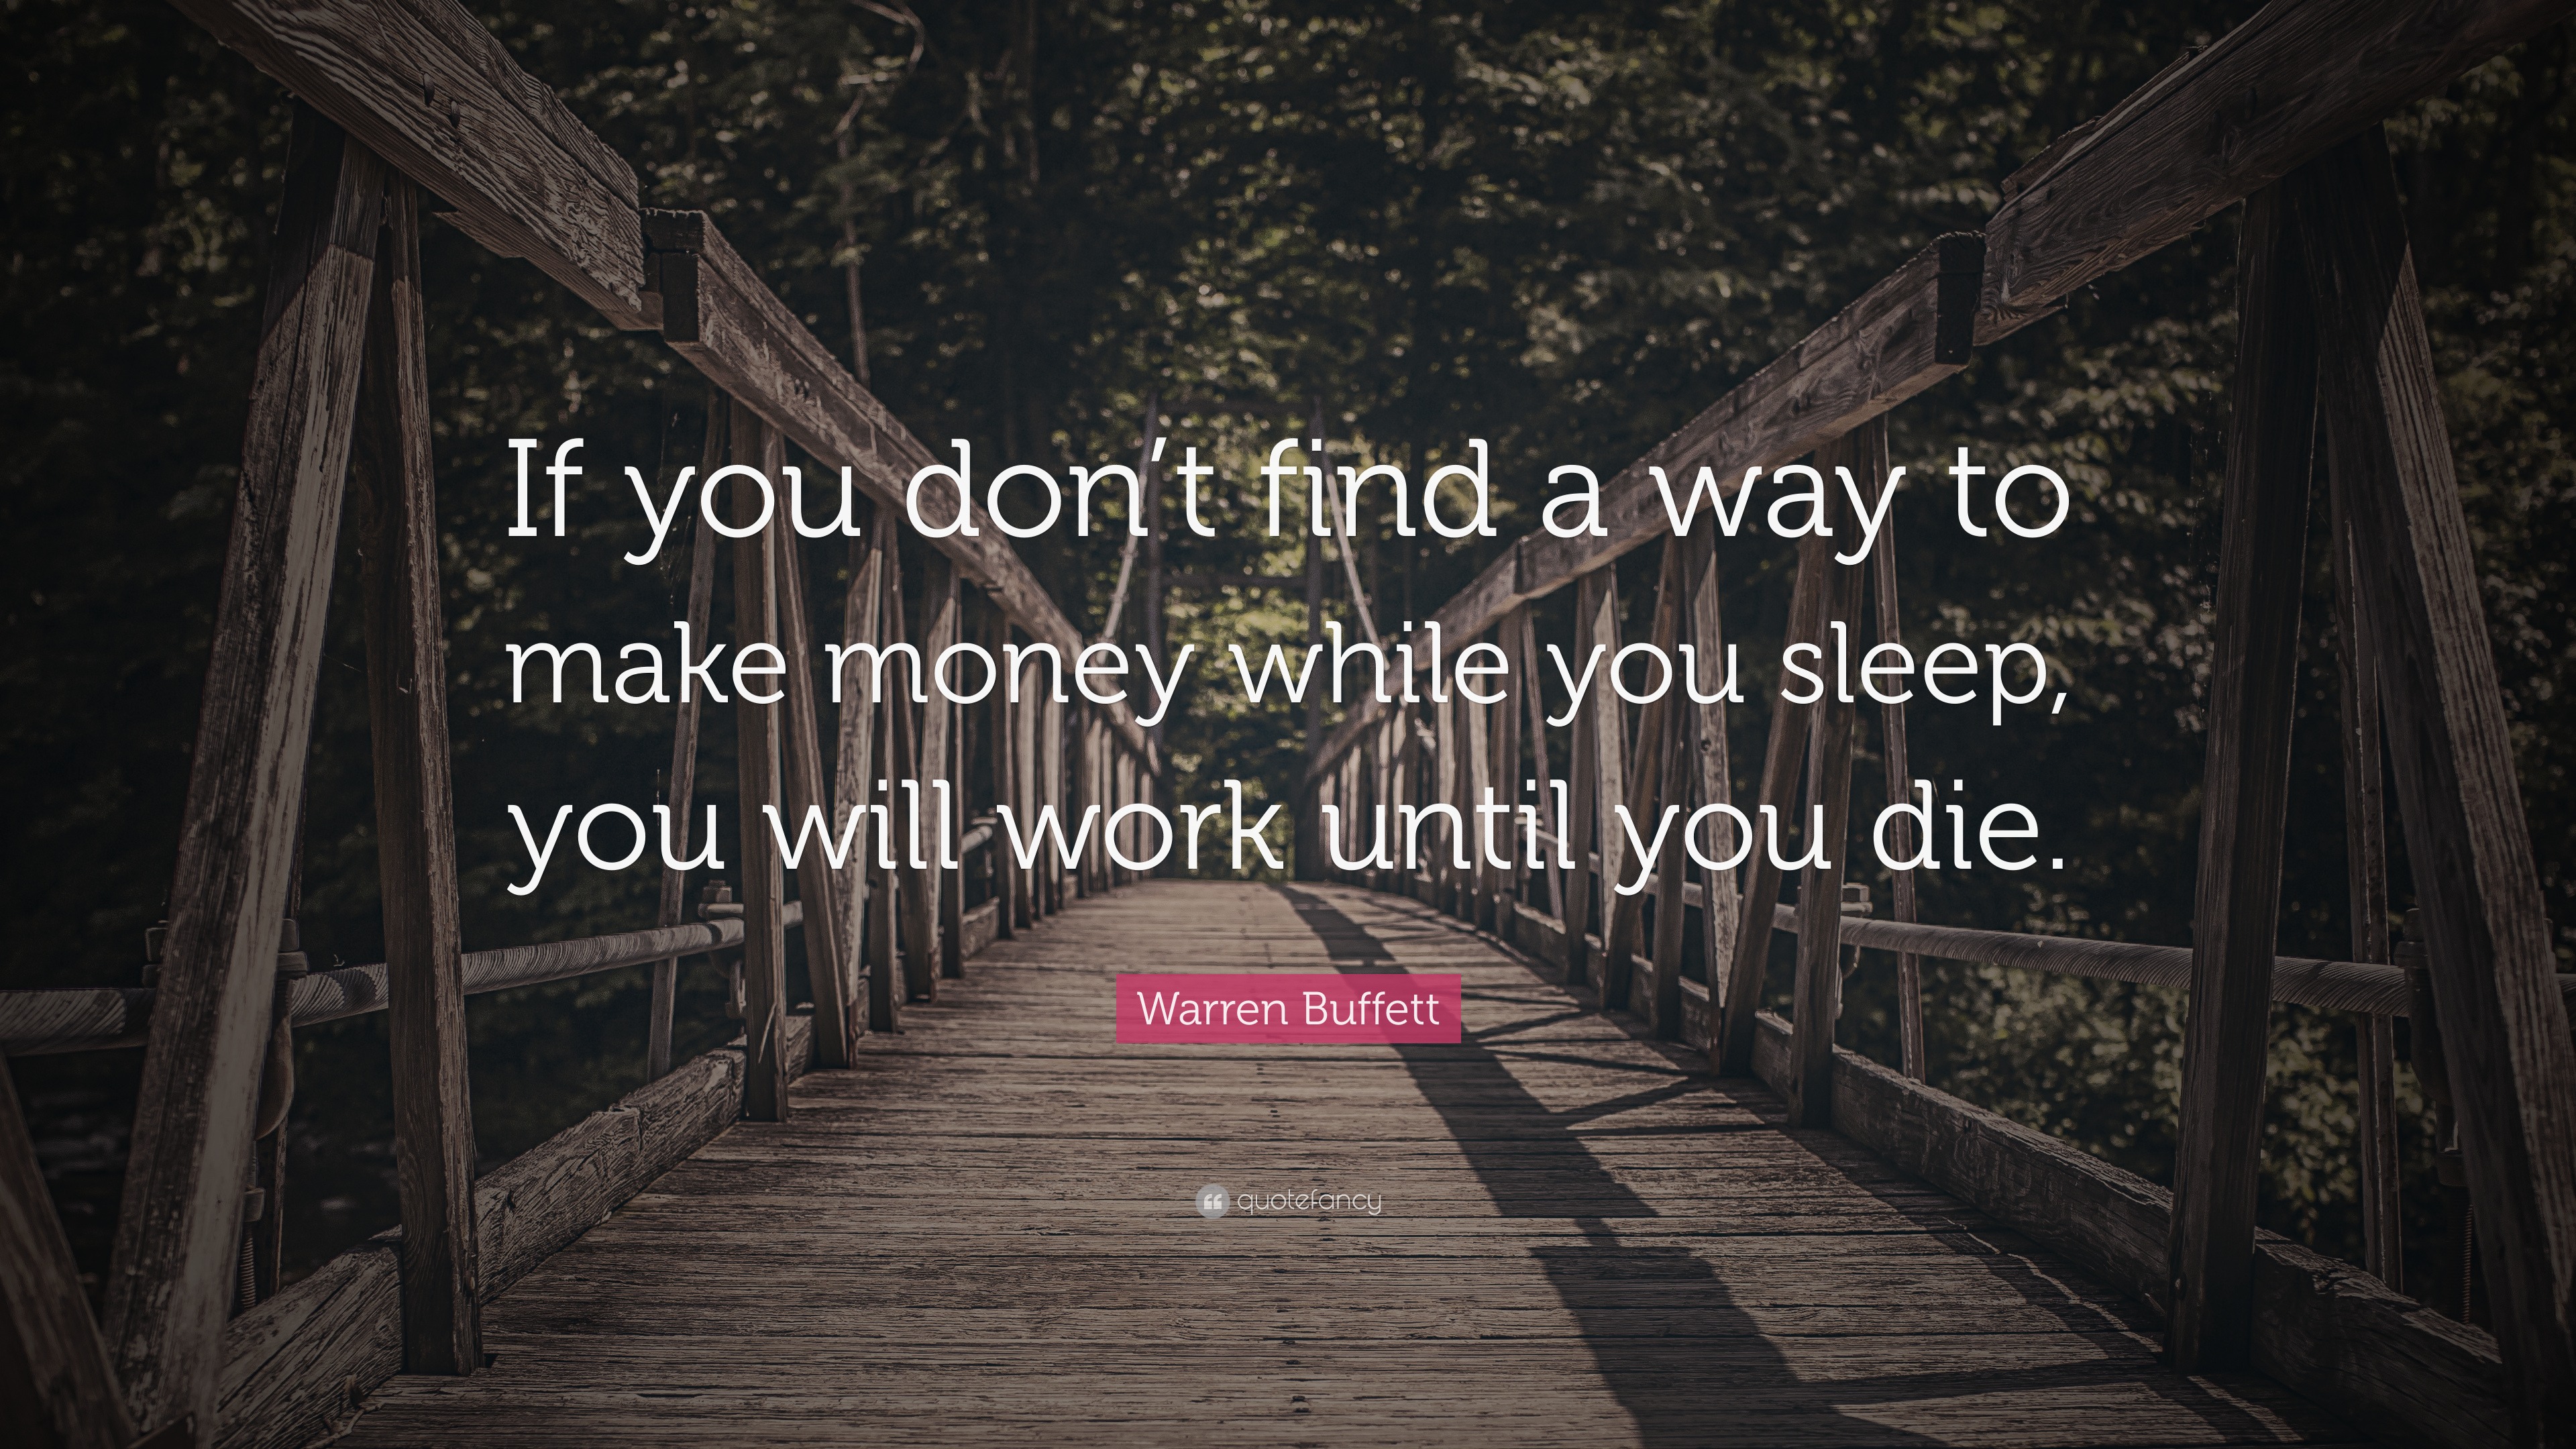 Warren Buffett Quote: “If you don't find a way to make money while you  sleep